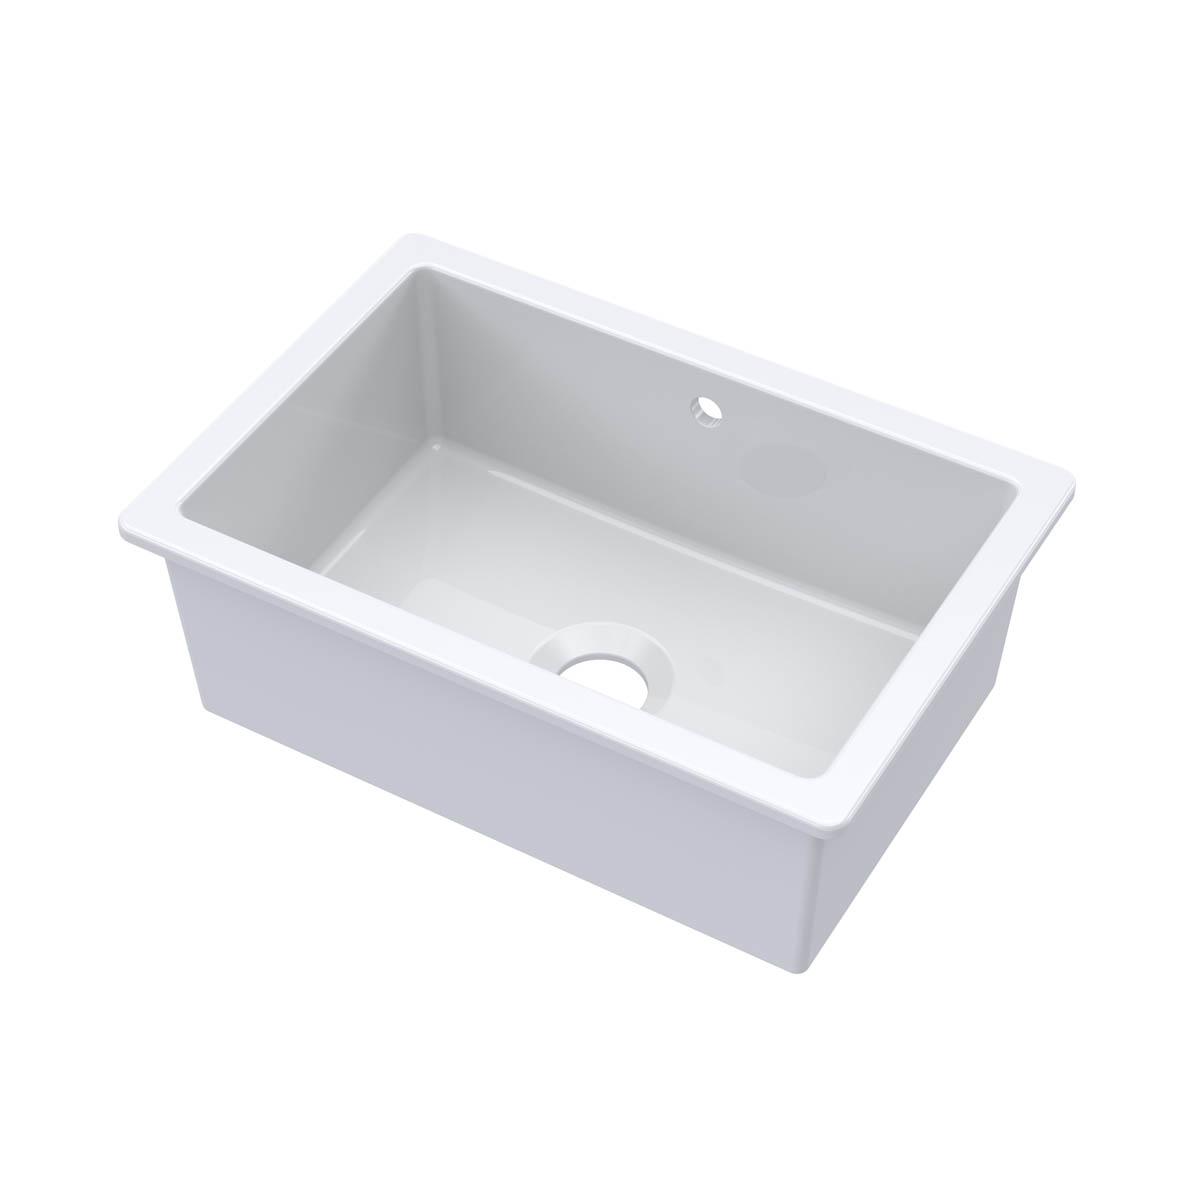 Nuie 711x482.5x254mmmm Inset or Undermount Sink with 90mm Central Waste & Overflow - White (20321)